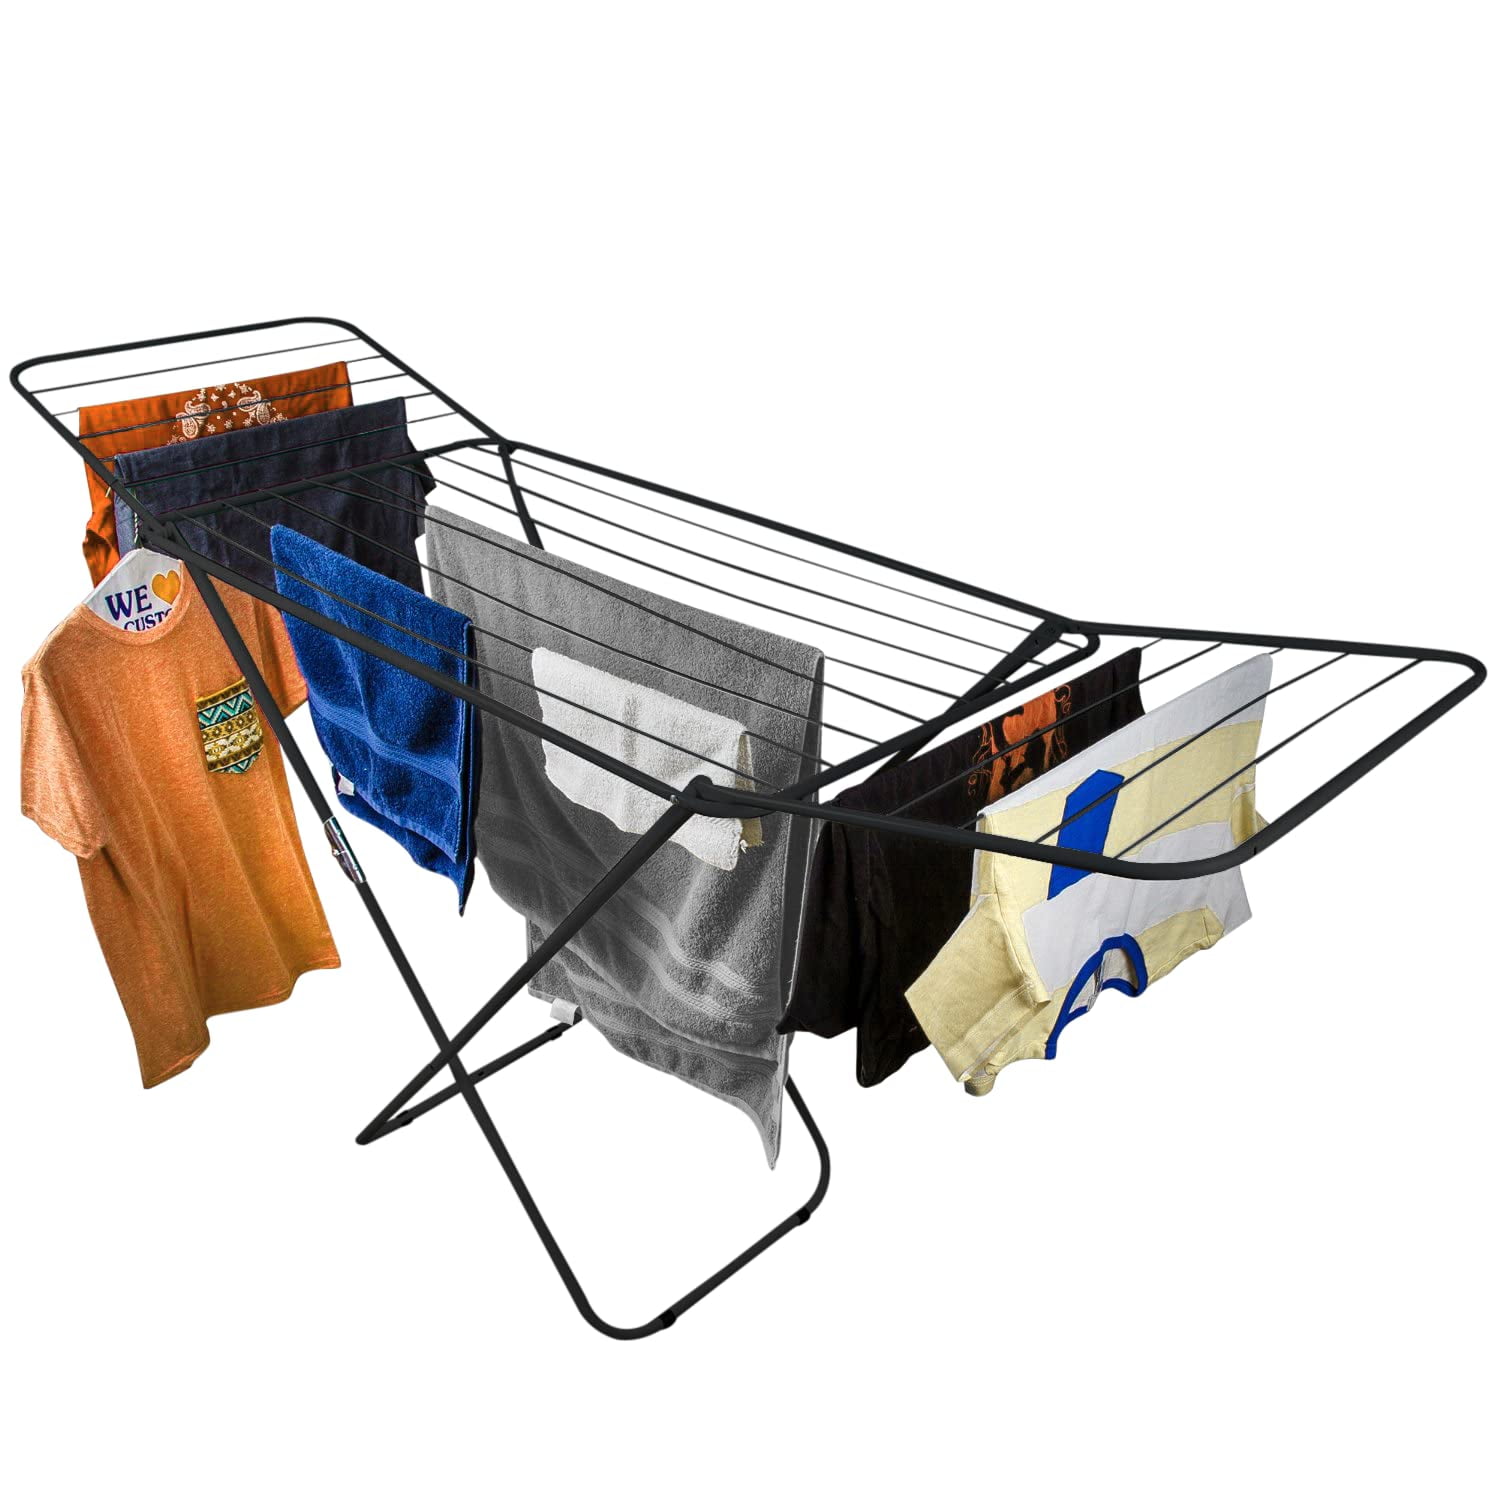 GIVIMO Clothes Drying Rack, Foldable Large Drying Hanger for